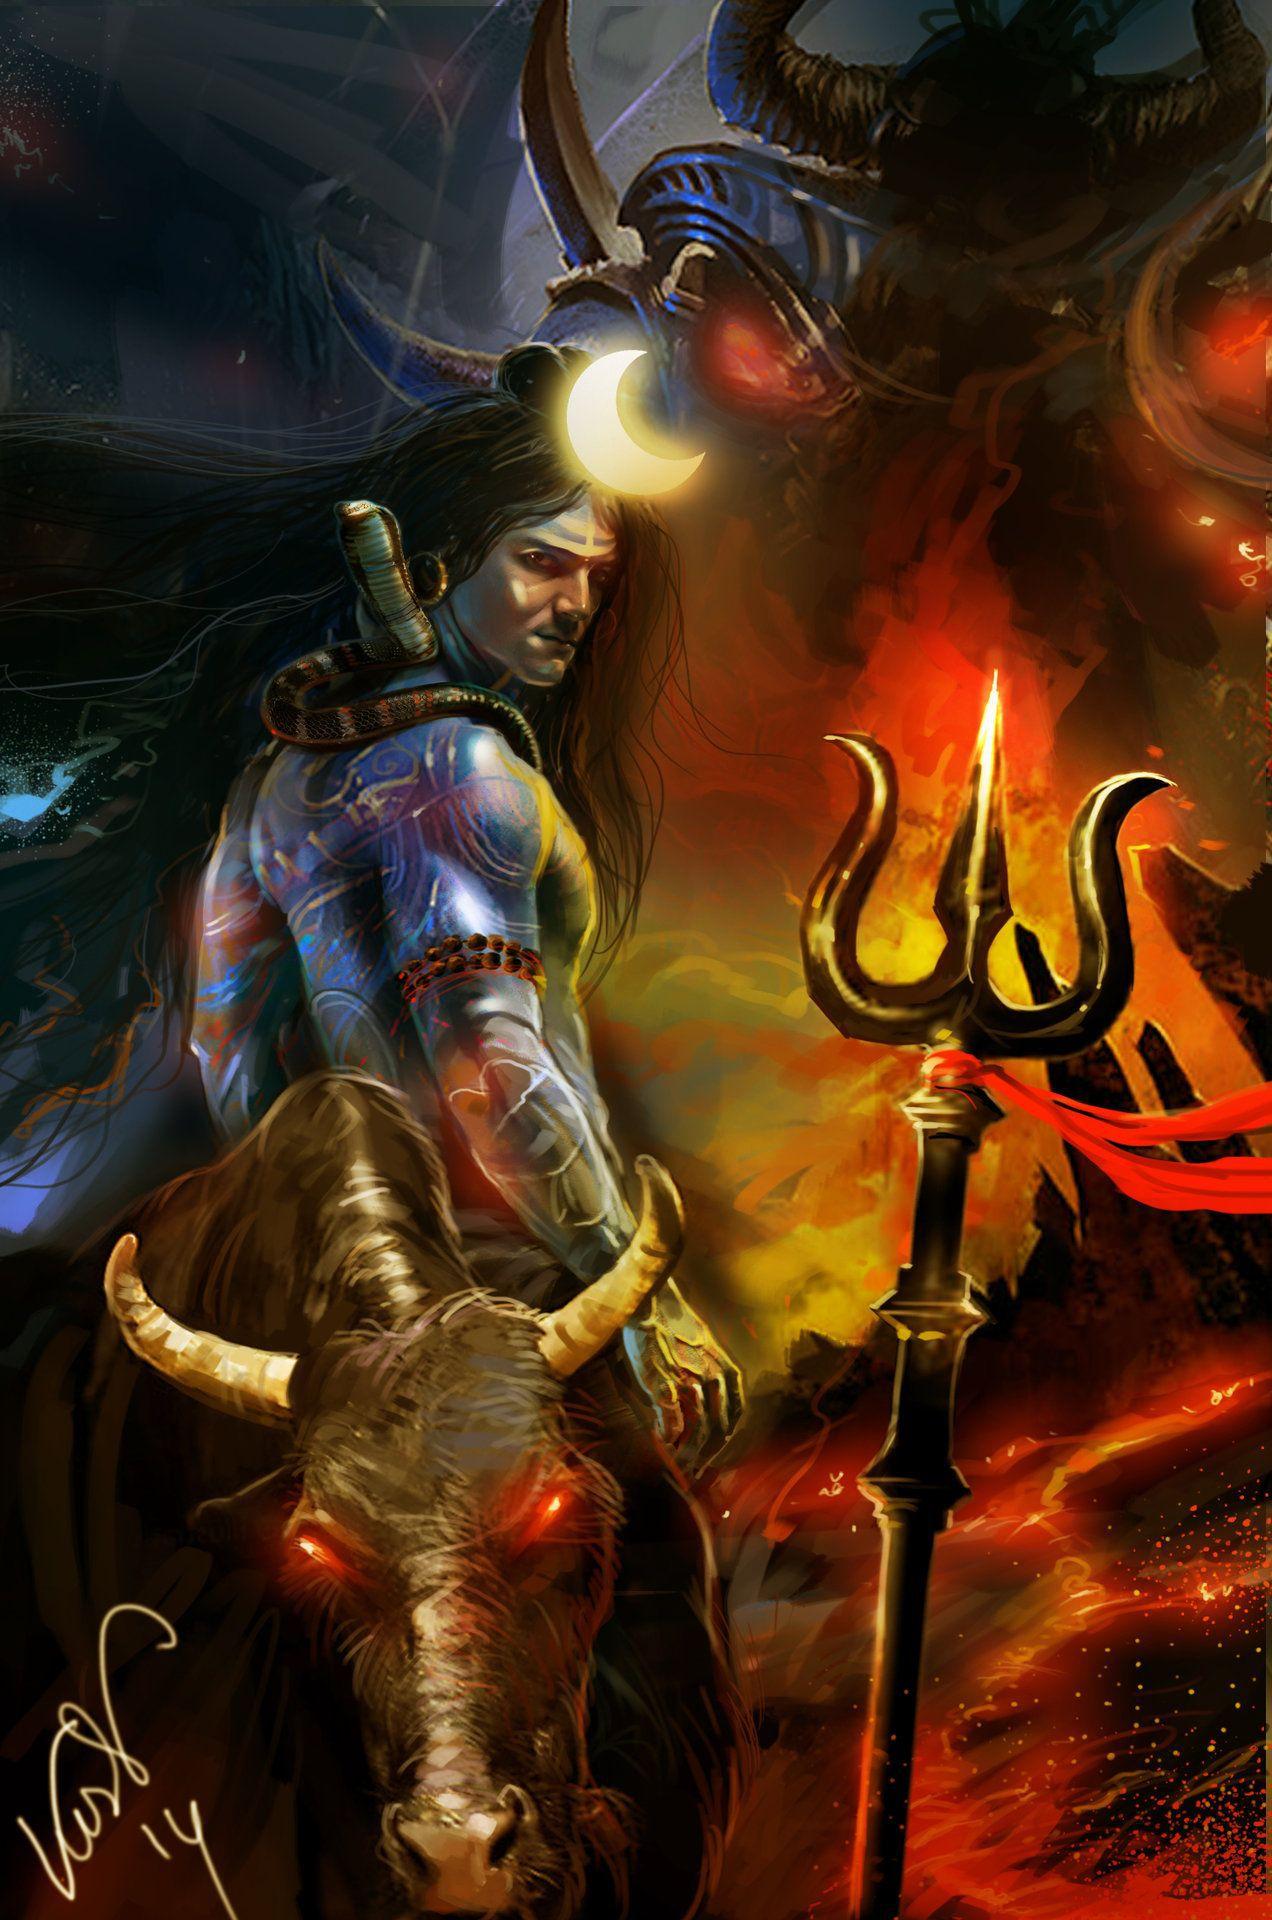 Lord Shiva Angry Wallpaper High Resolution Download